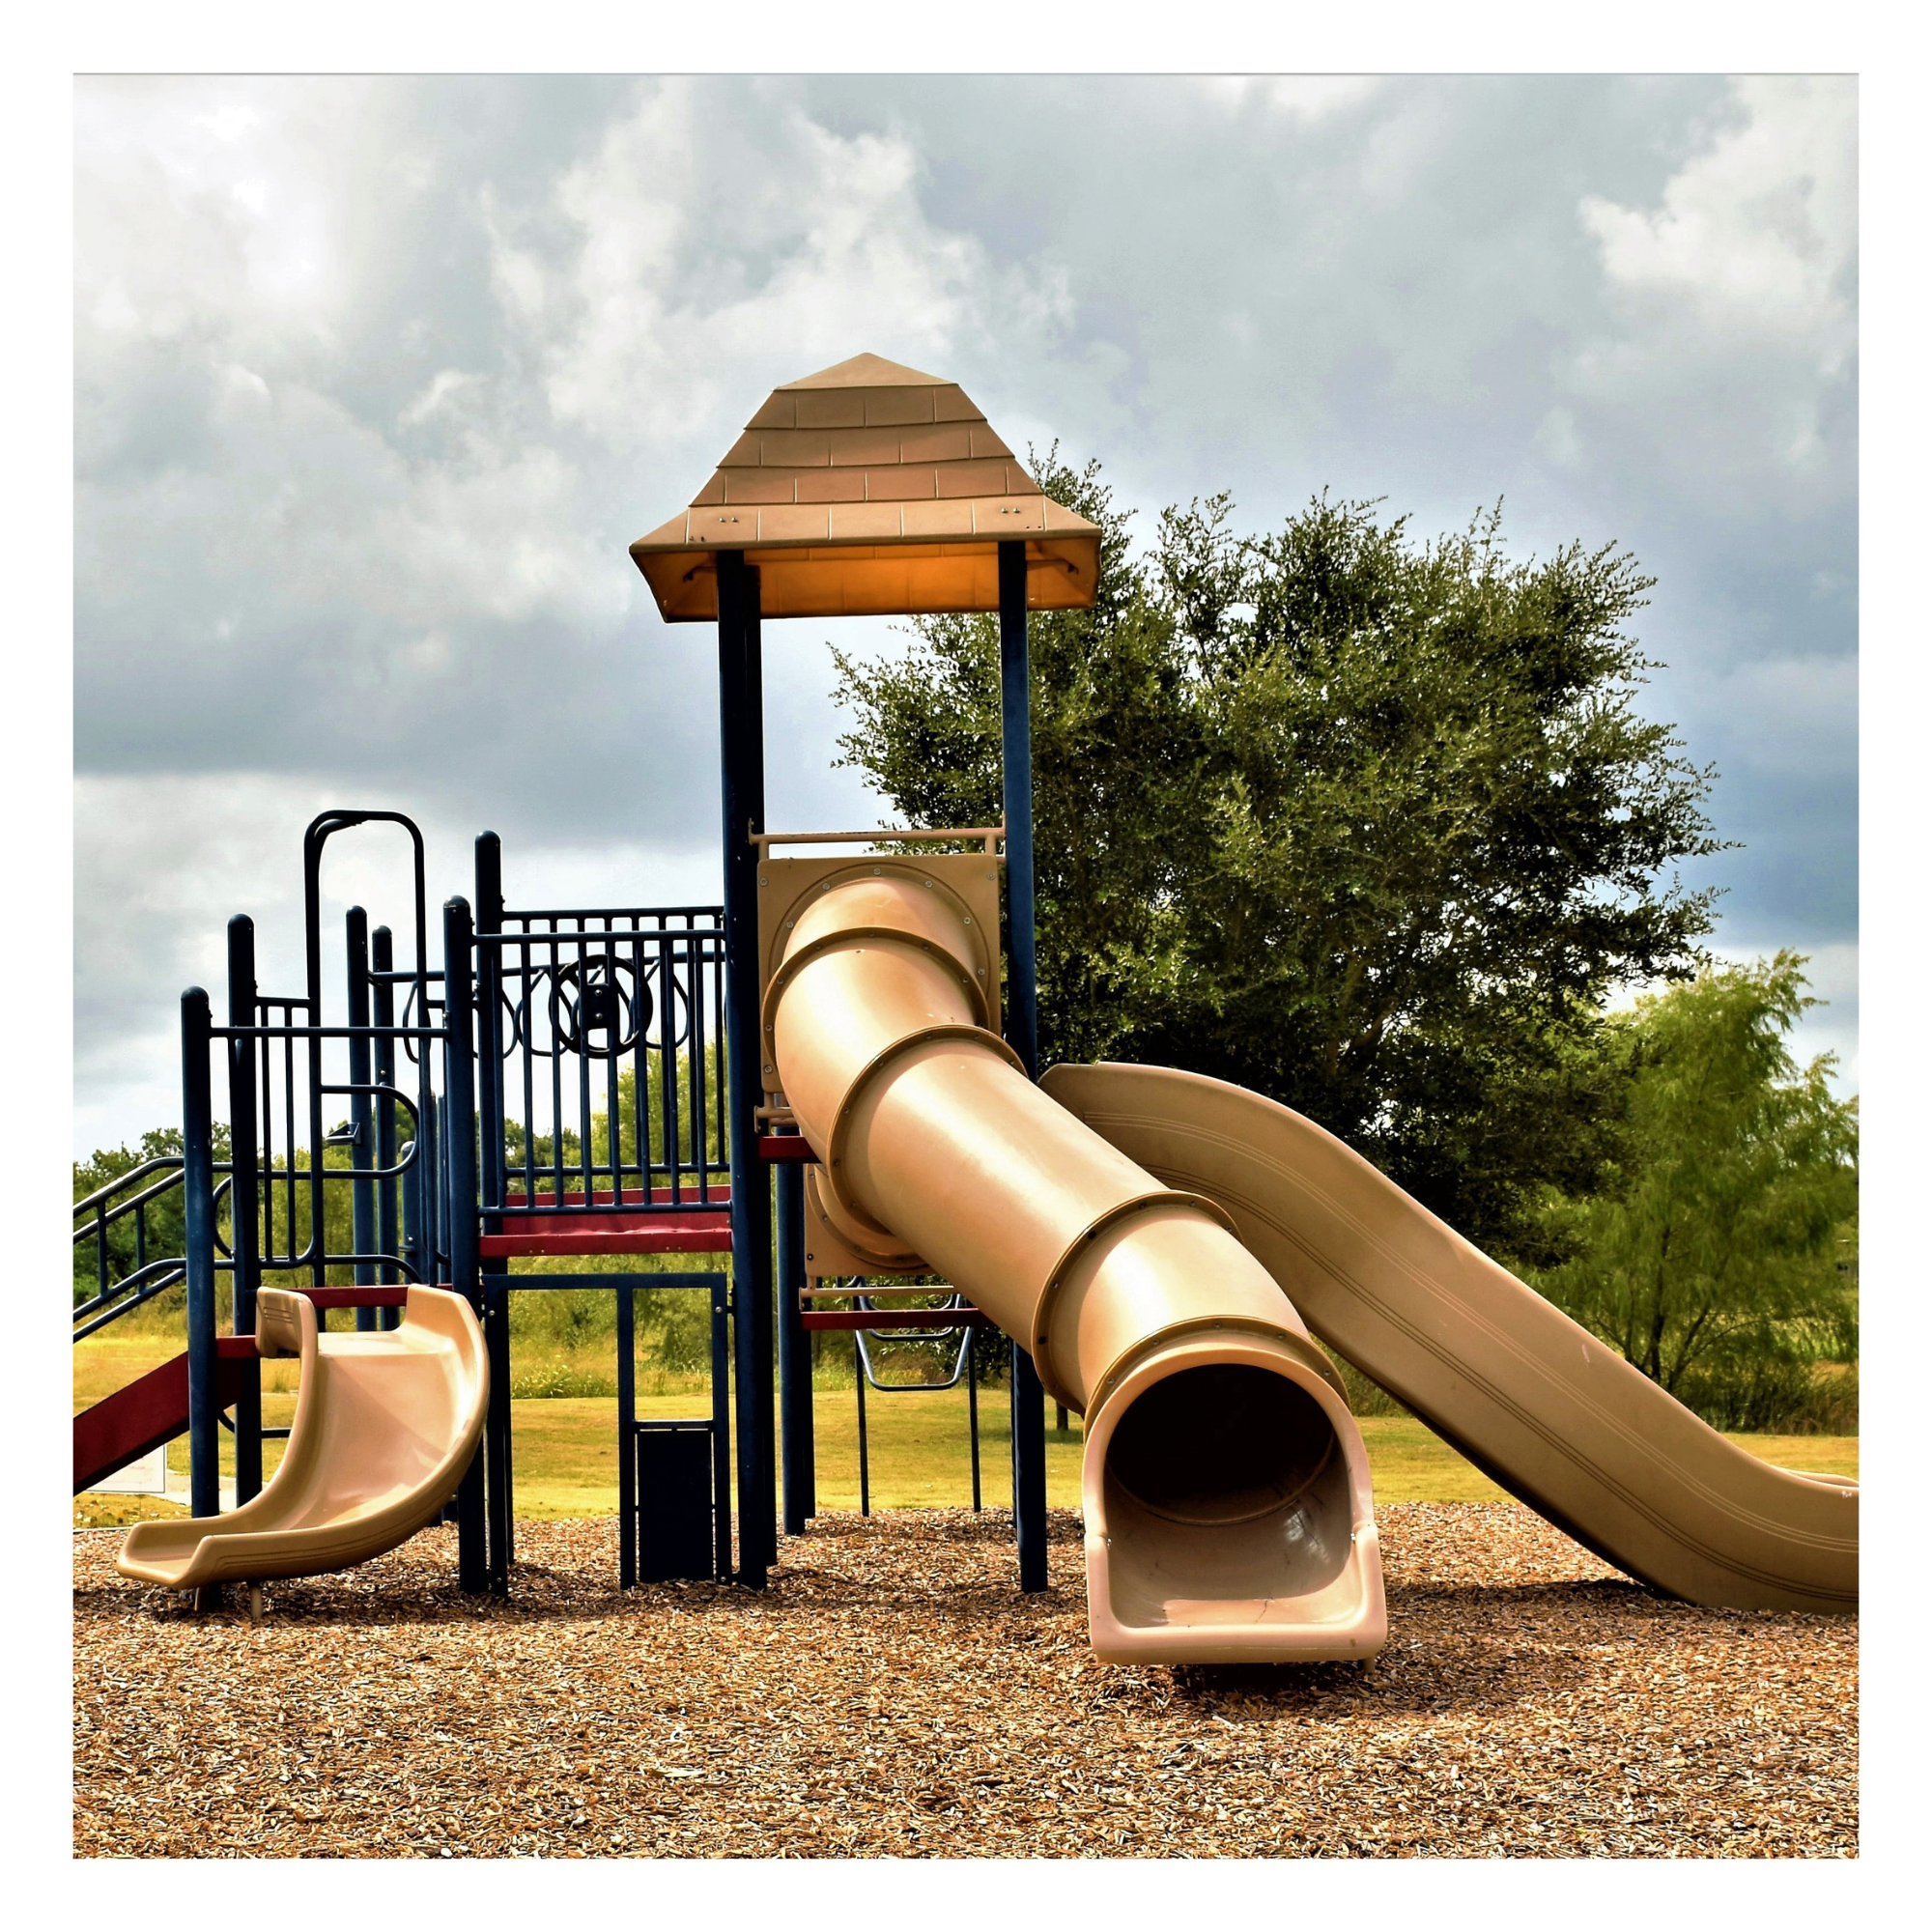 Children's playground with play bark chippings